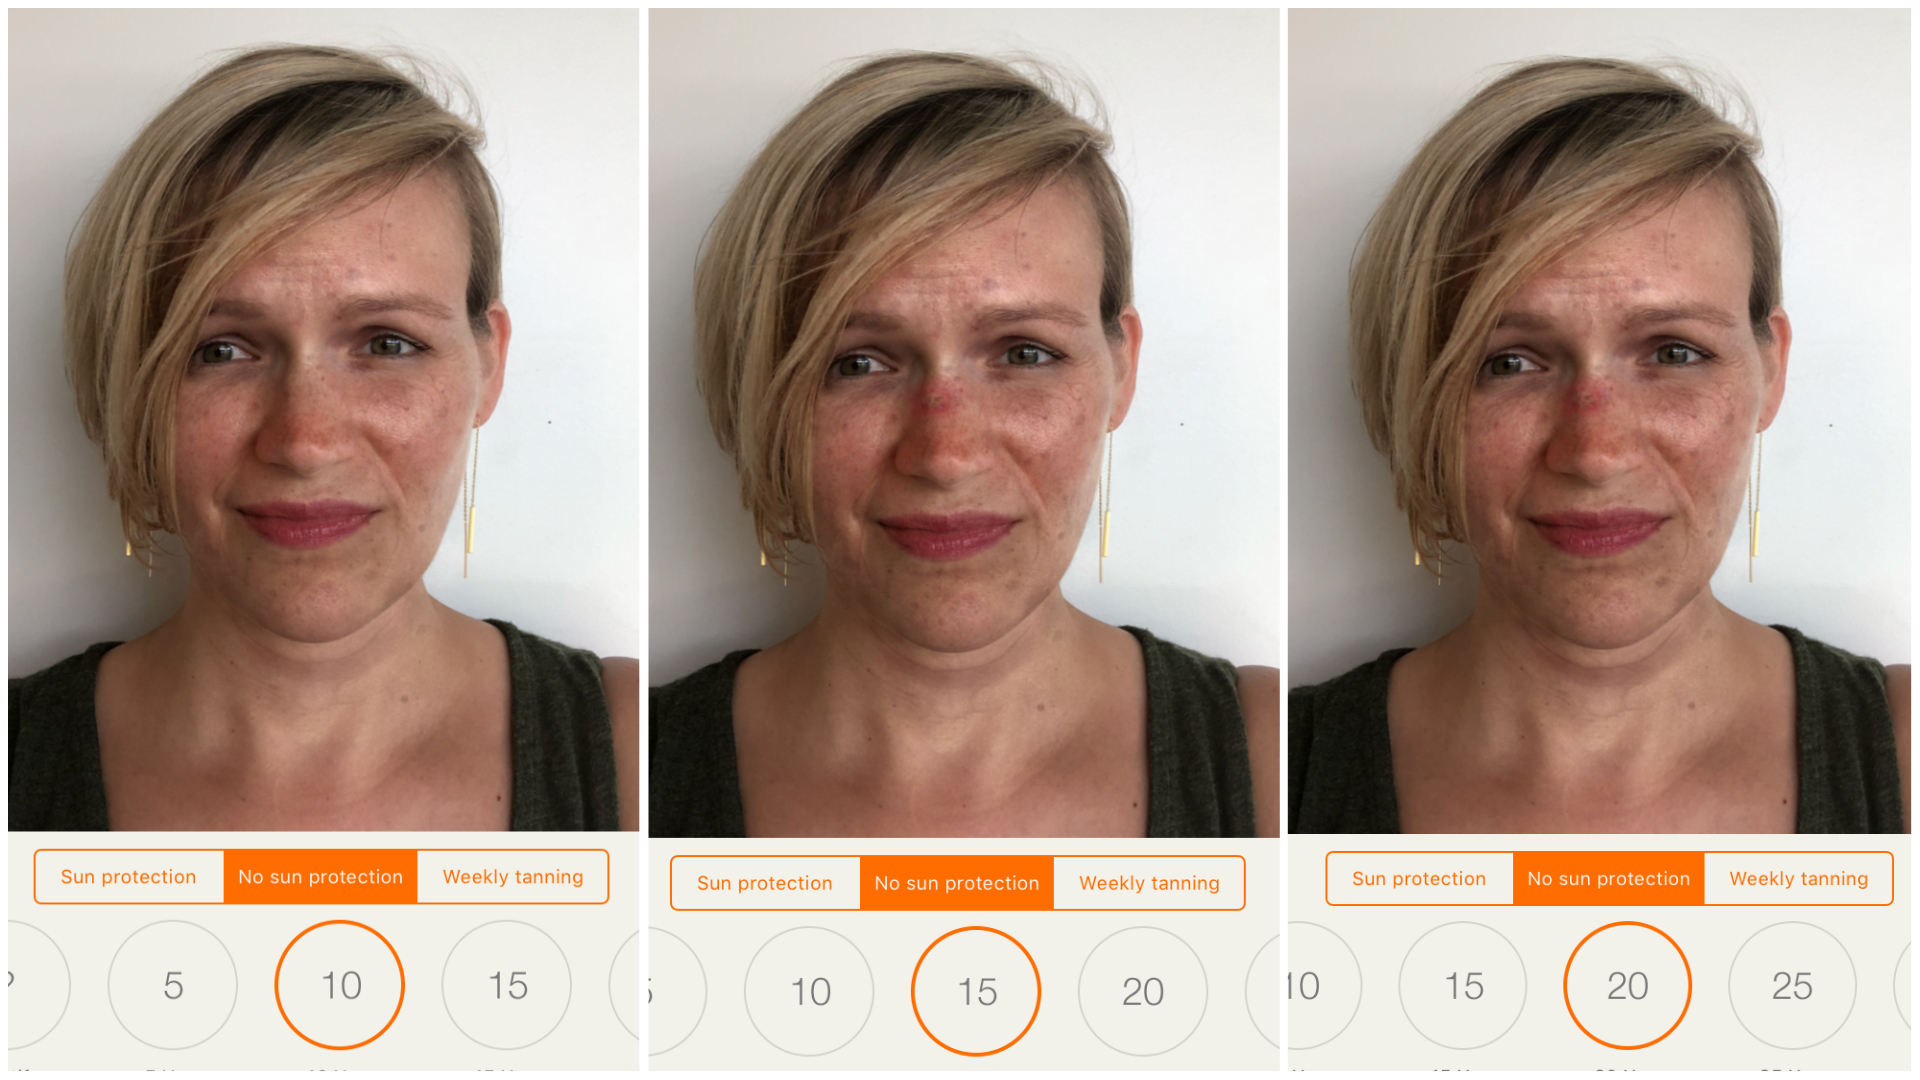 This Terrifying App Shows You What Not Using Sunscreen Will Do to Your Face - VICE